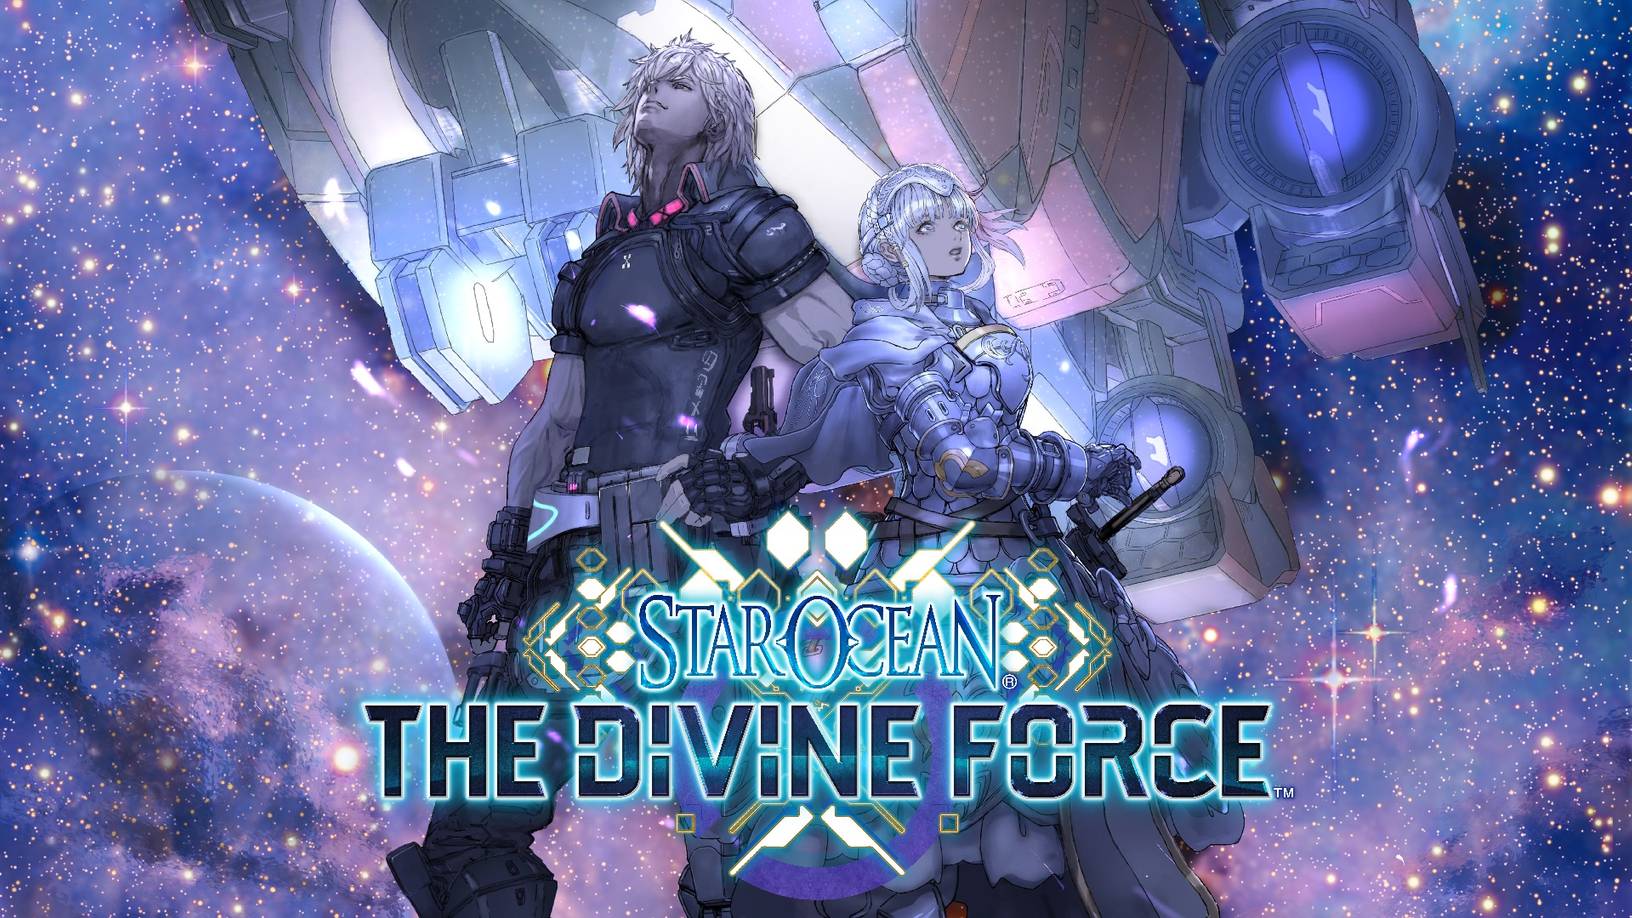 Star Ocean The Divine Force Official Material Collection Available for Pre-Order; 192 Pages, October 2022 Shipment